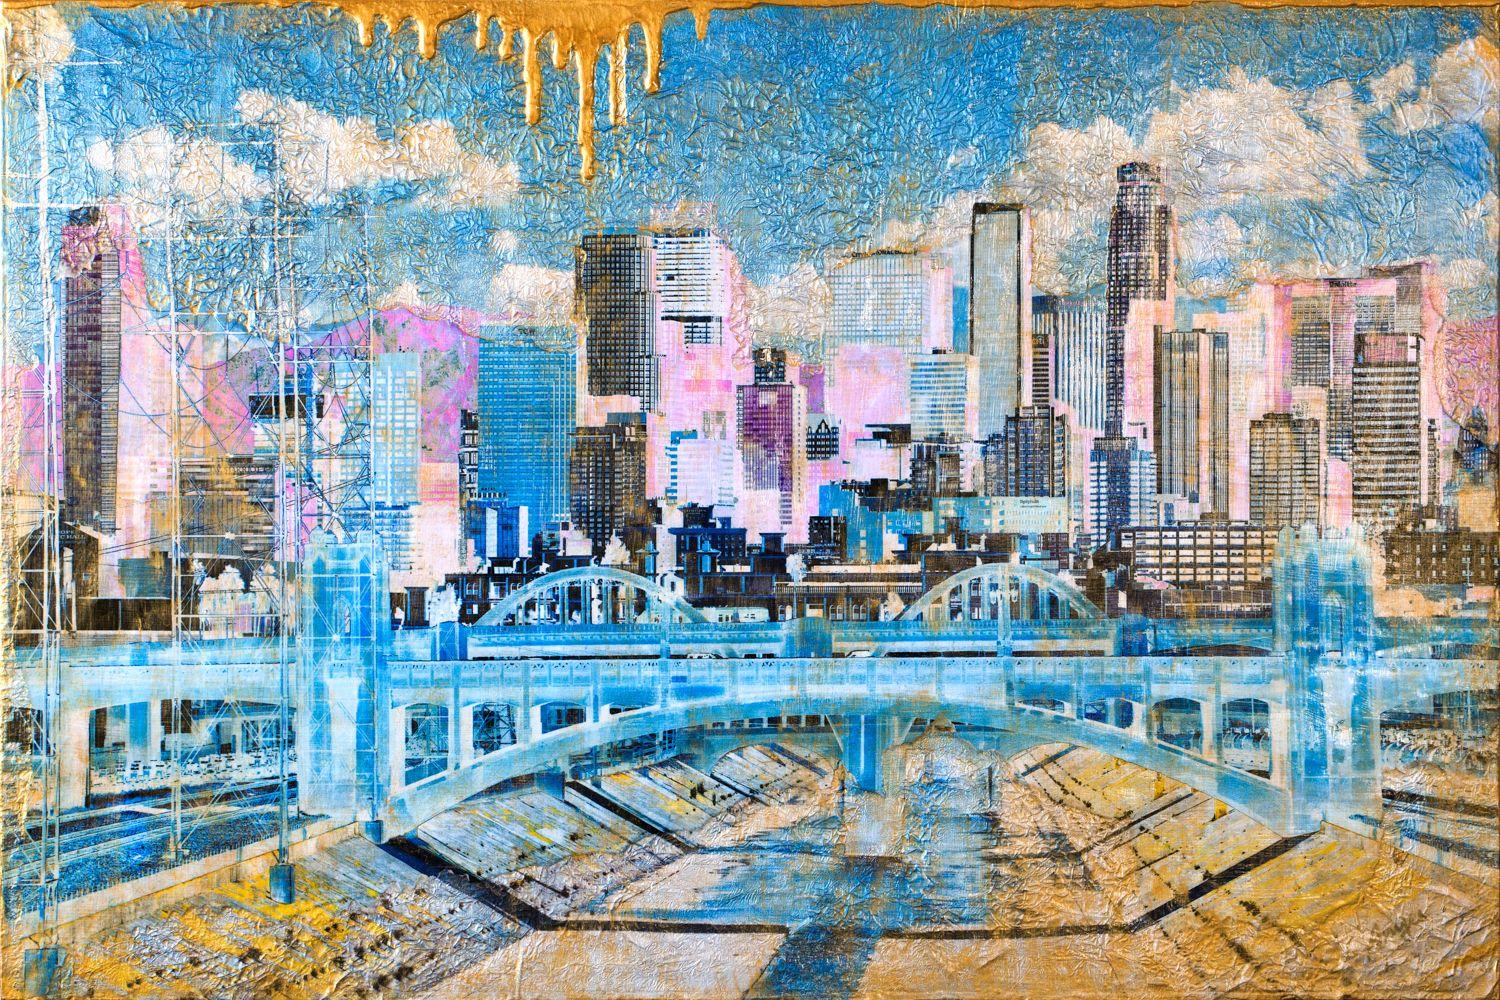 Los Angeles in Baby Colors & Gold, Mixed Media on Wood Panel - Mixed Media Art by Anyes Galleani